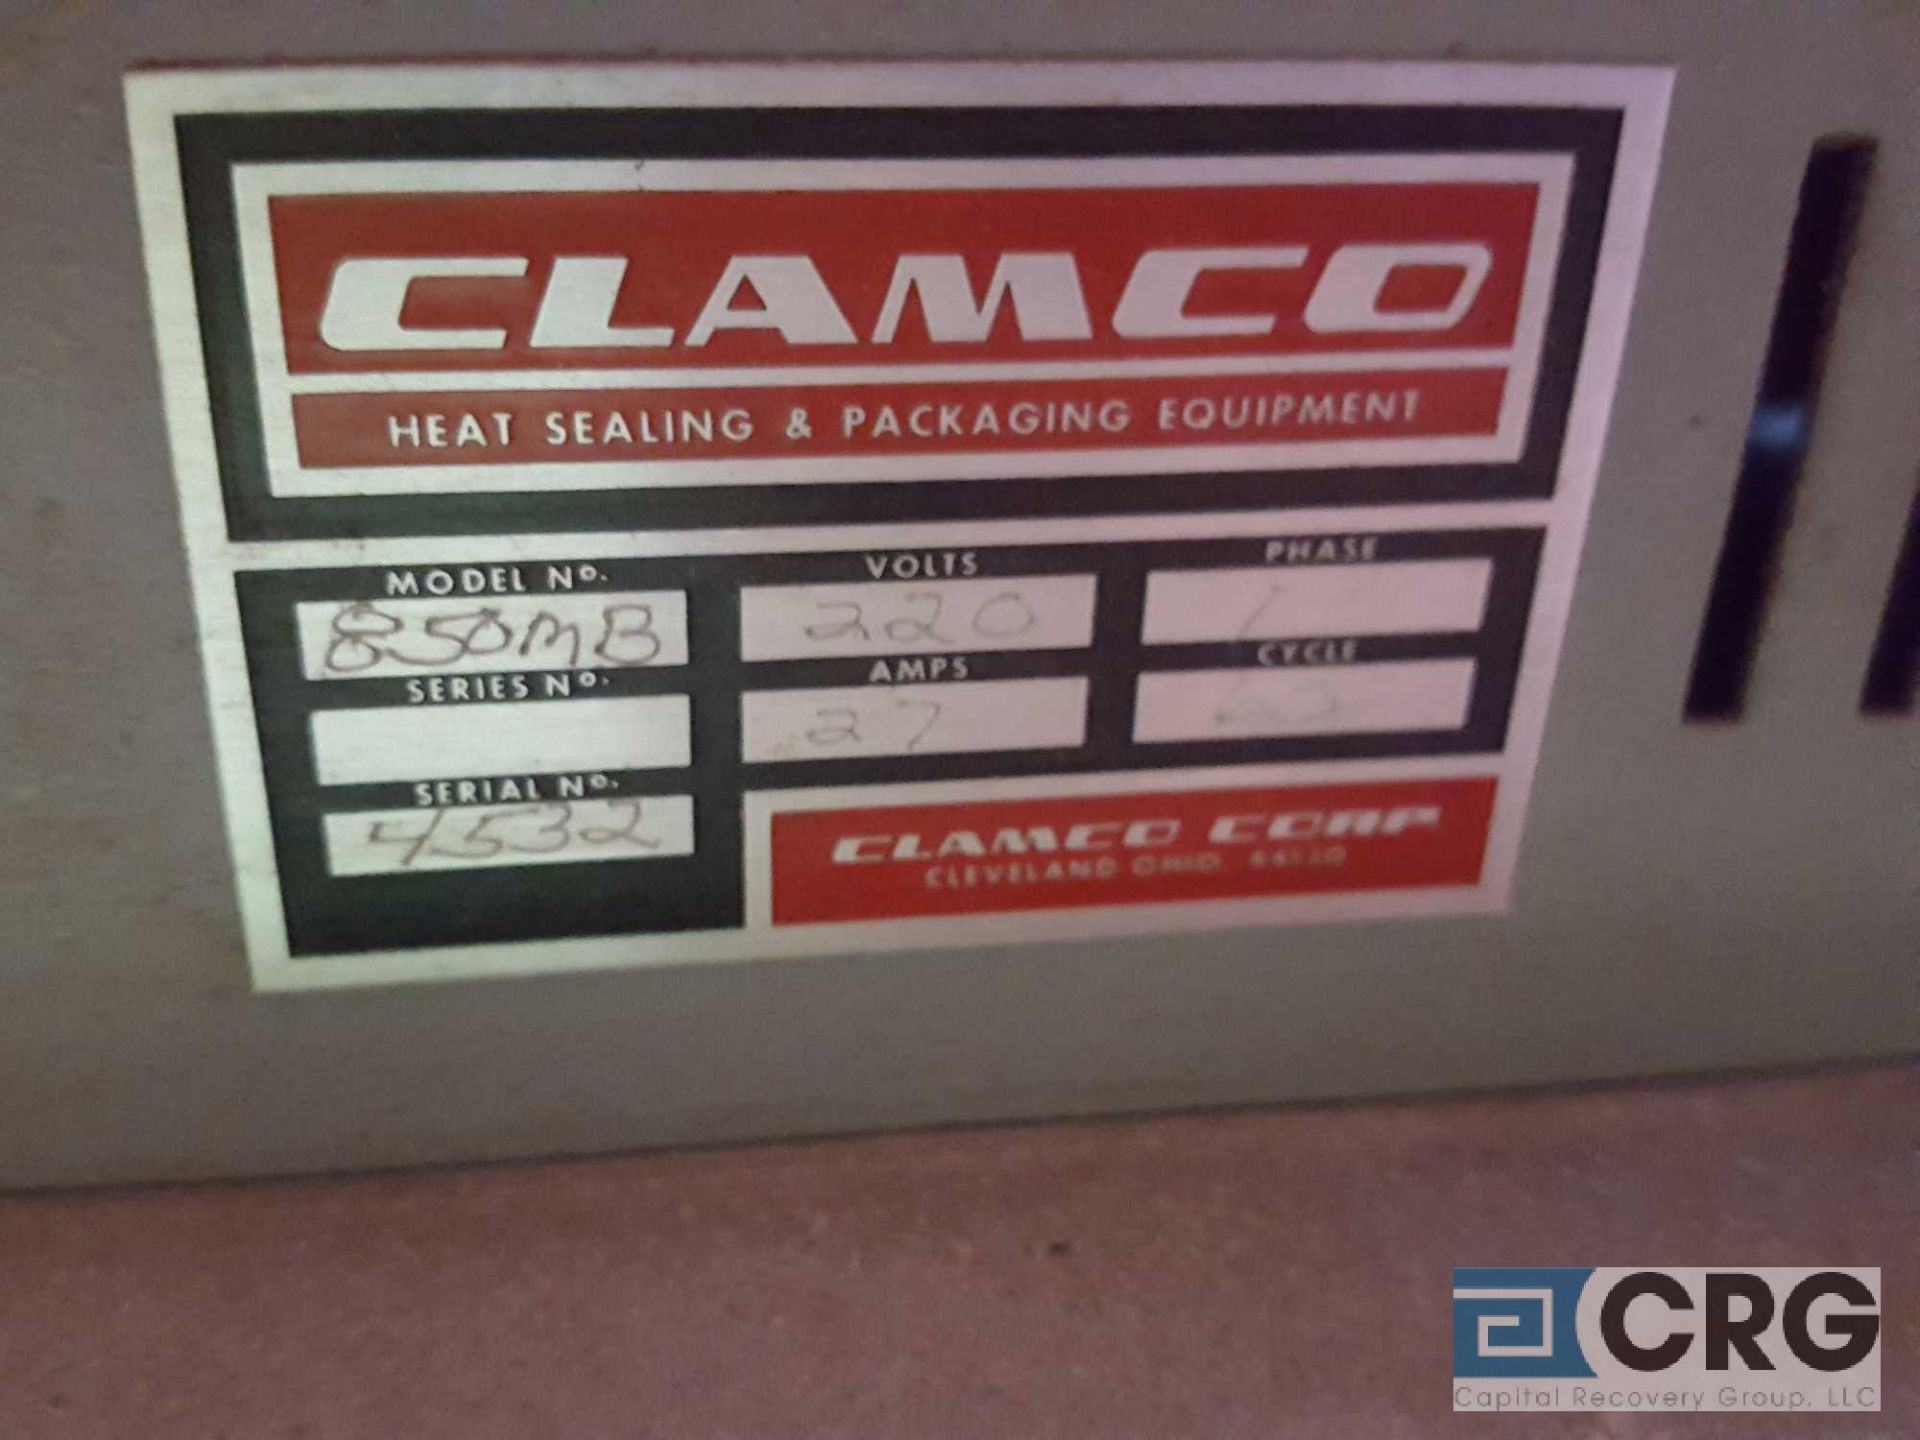 Clamco 850MB conveyor type portable shrink tunnel, 220V, 27 A, 1 Ph., 60 Hz, s/n 4532 - LOCATED AT - Image 4 of 4